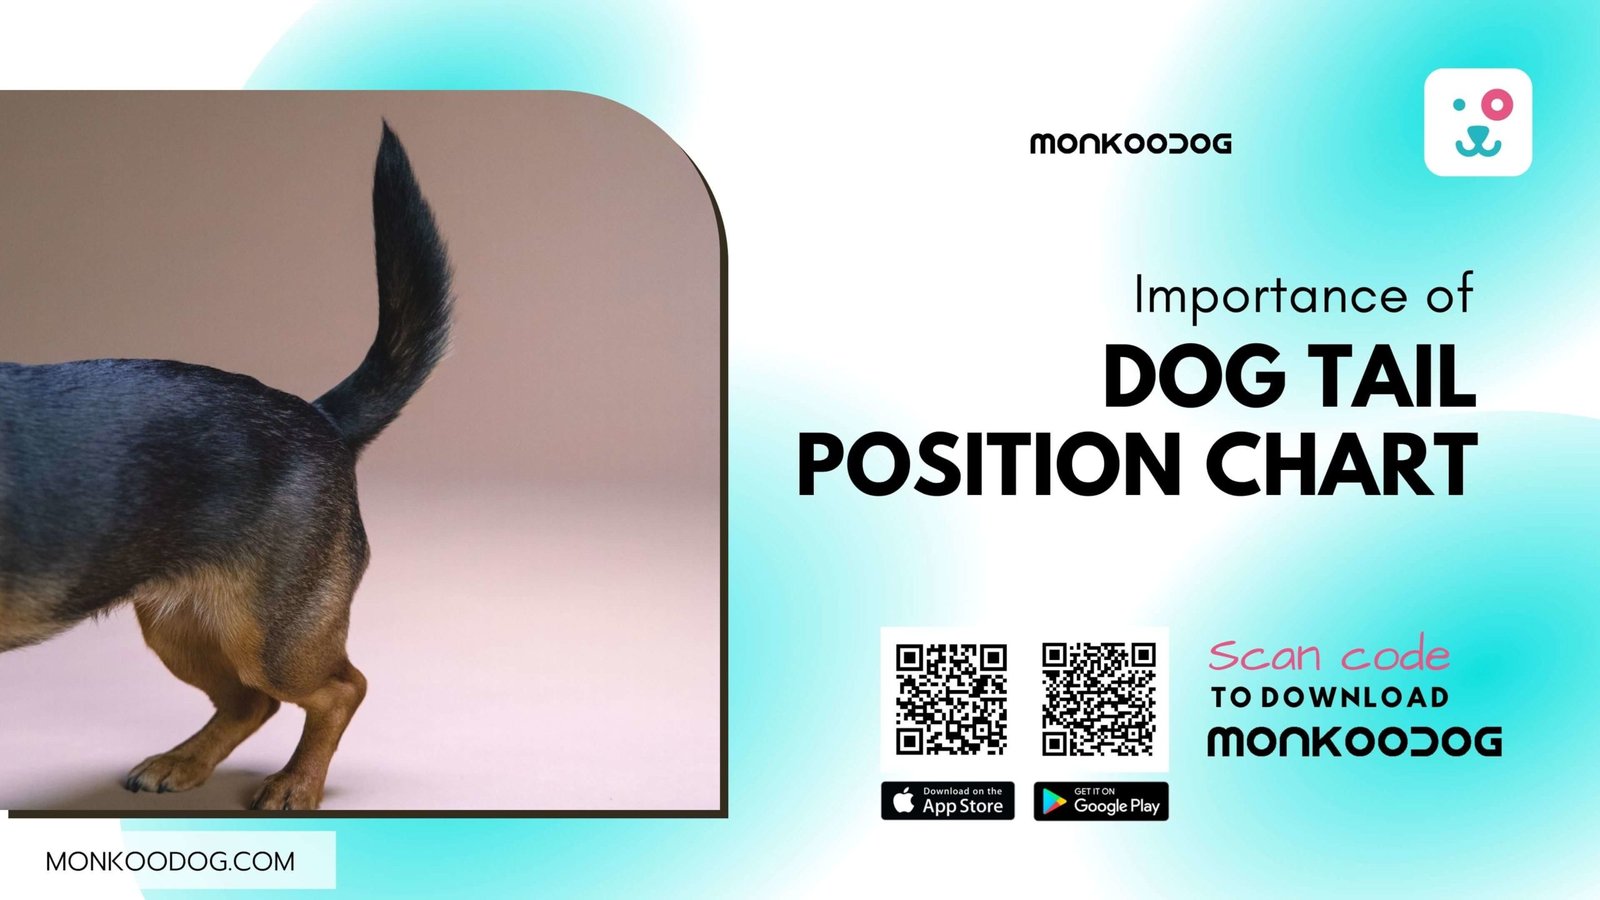 Importance of dog tail position chart